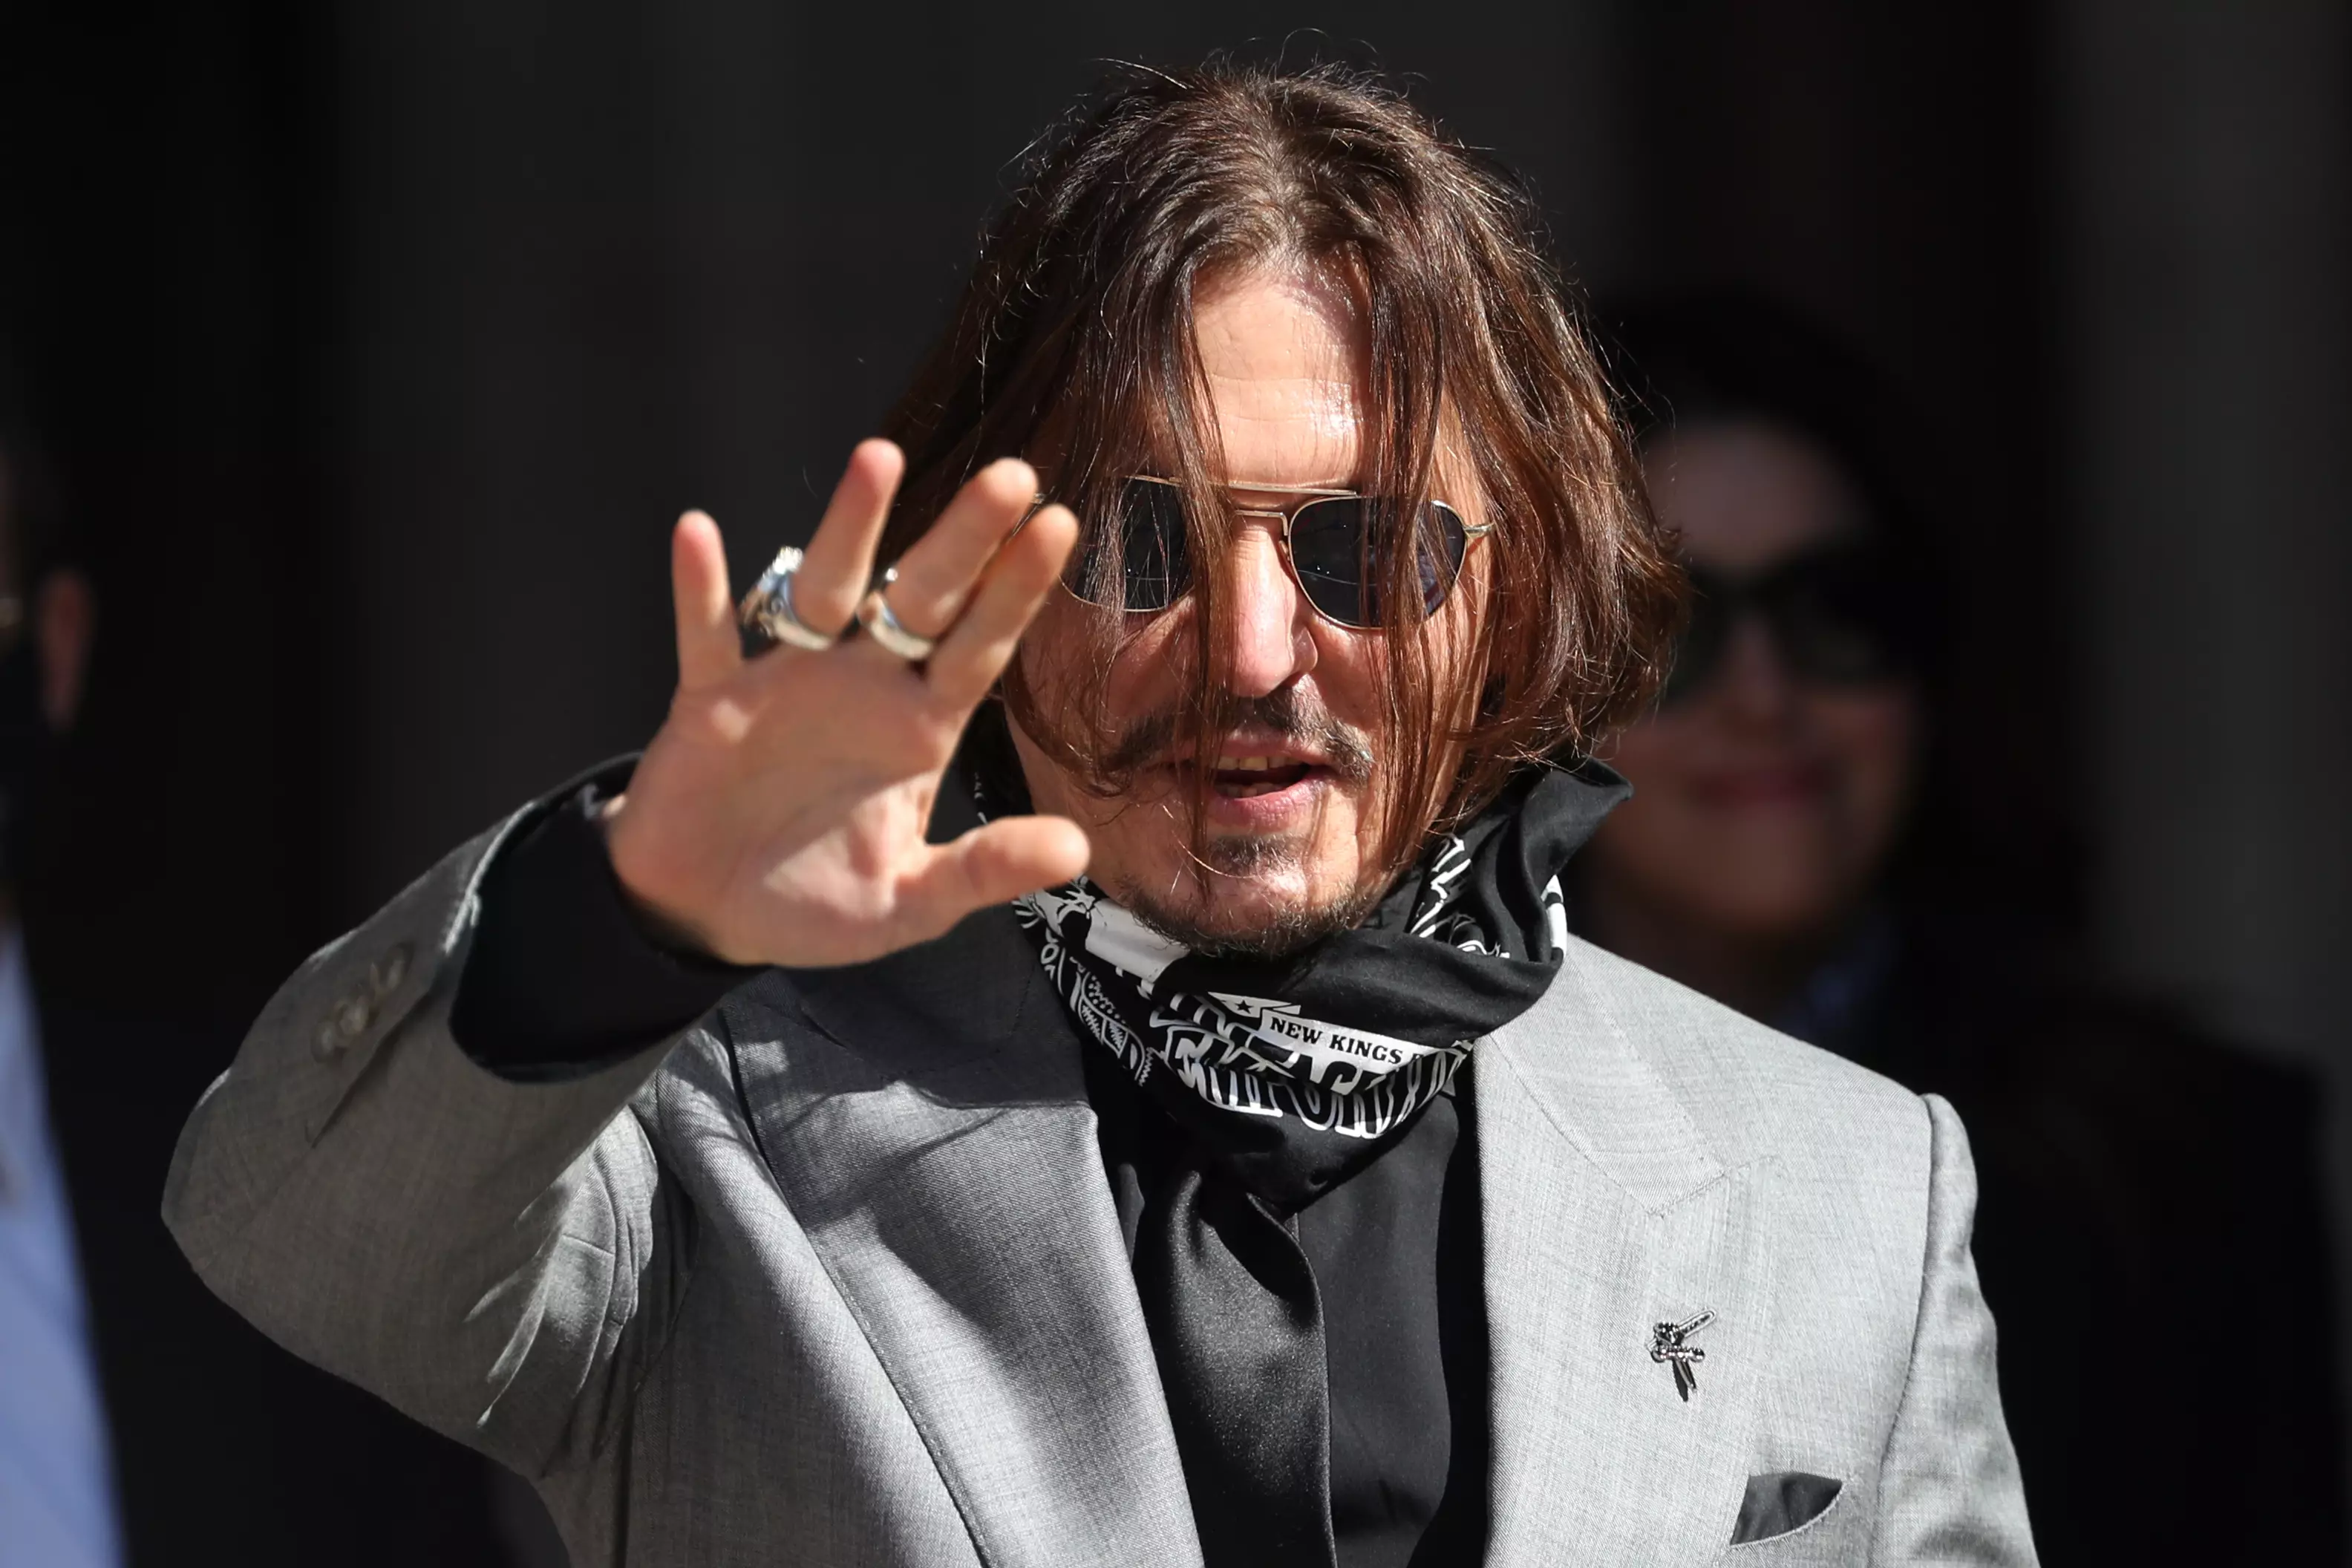 Depp lost a libel case against The Sun.